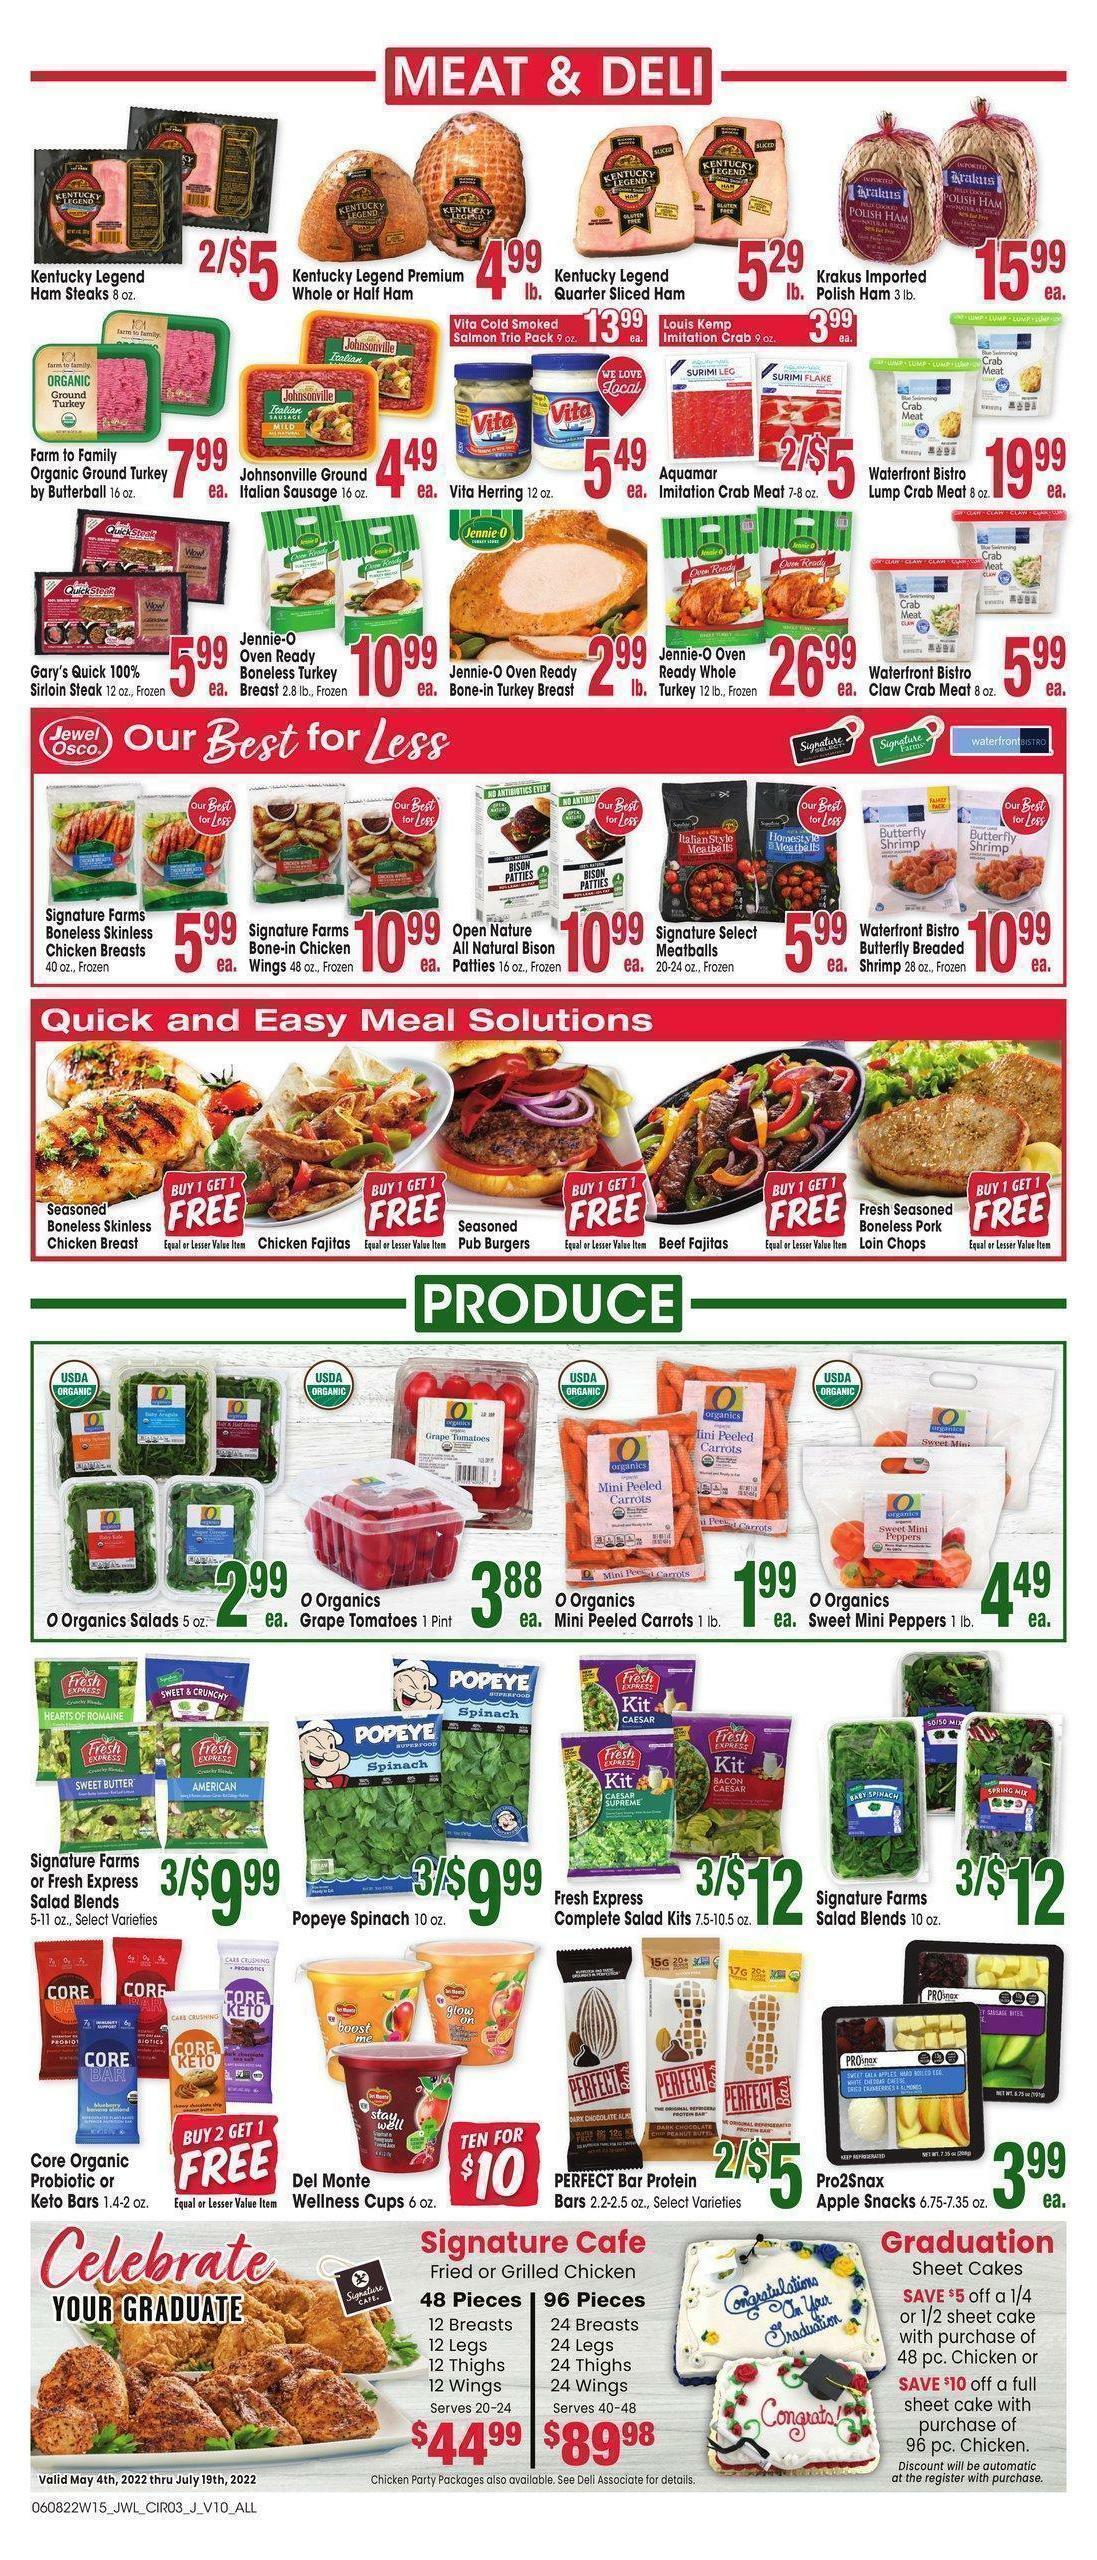 Jewel Osco Weekly Ad from June 8